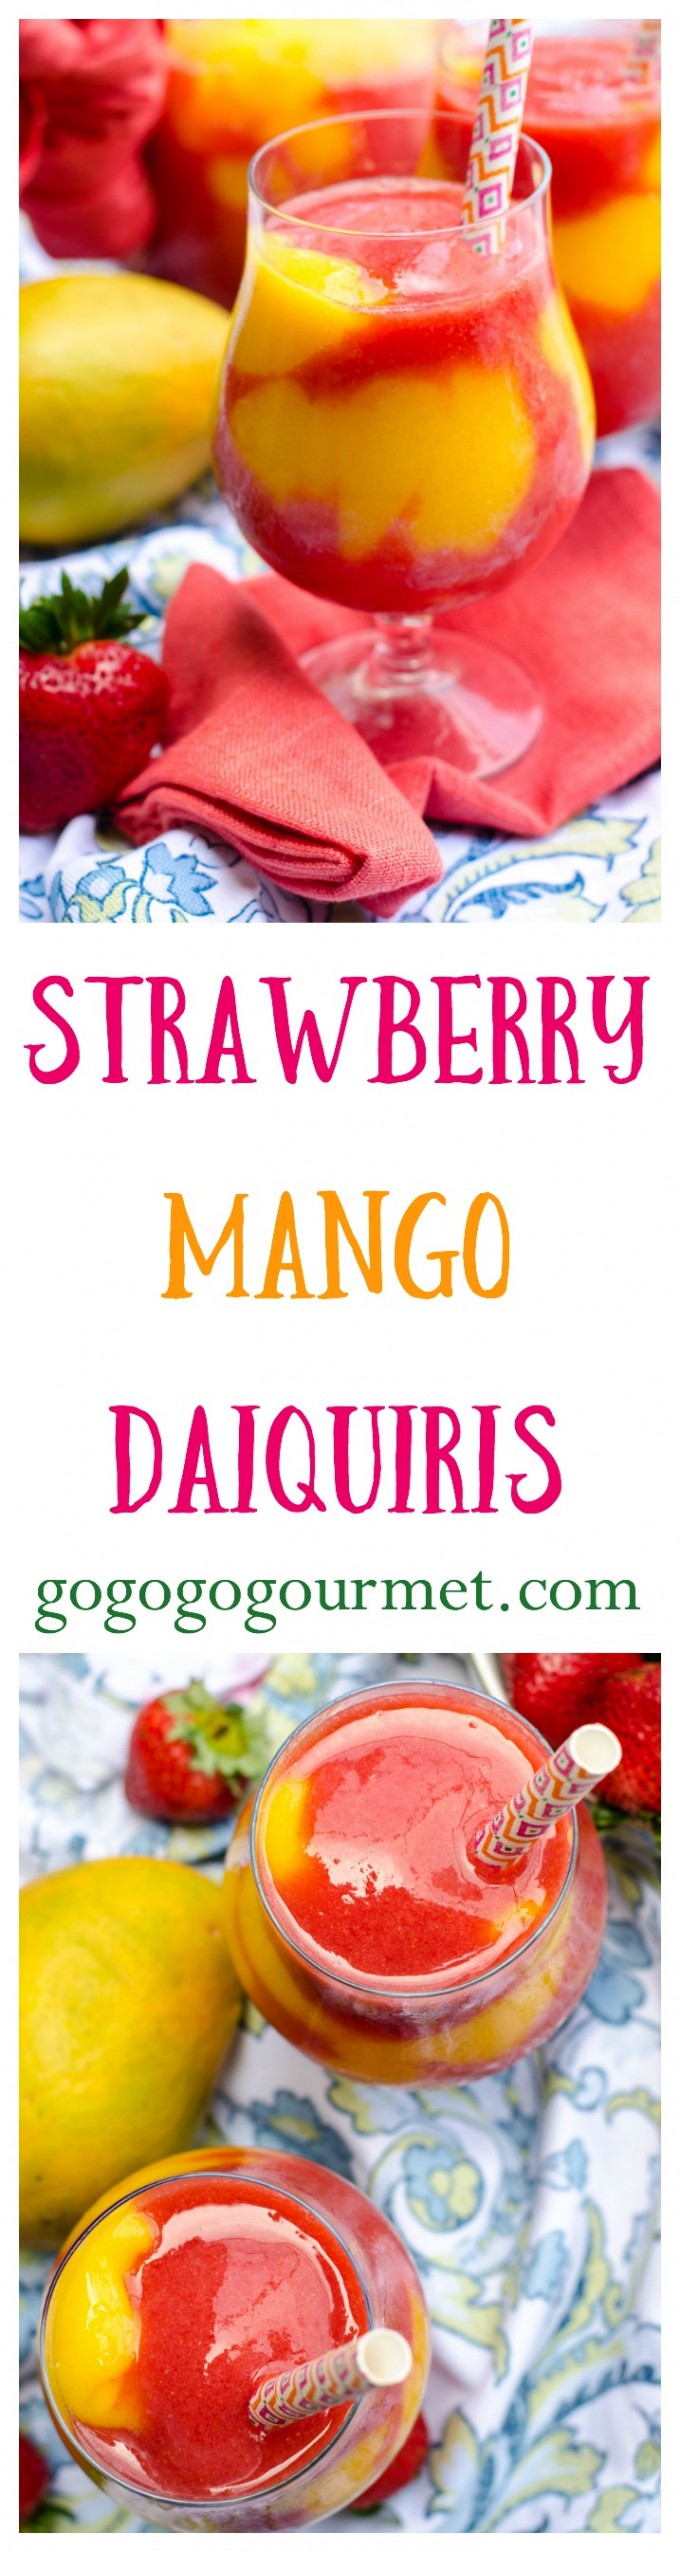 These Strawberry Mango Daiquiris are better than ANY concentrated mix- and just look at all that COLOR! | Go Go Go Gourmet @Go Go Go Gourmet via @gogogogourmet